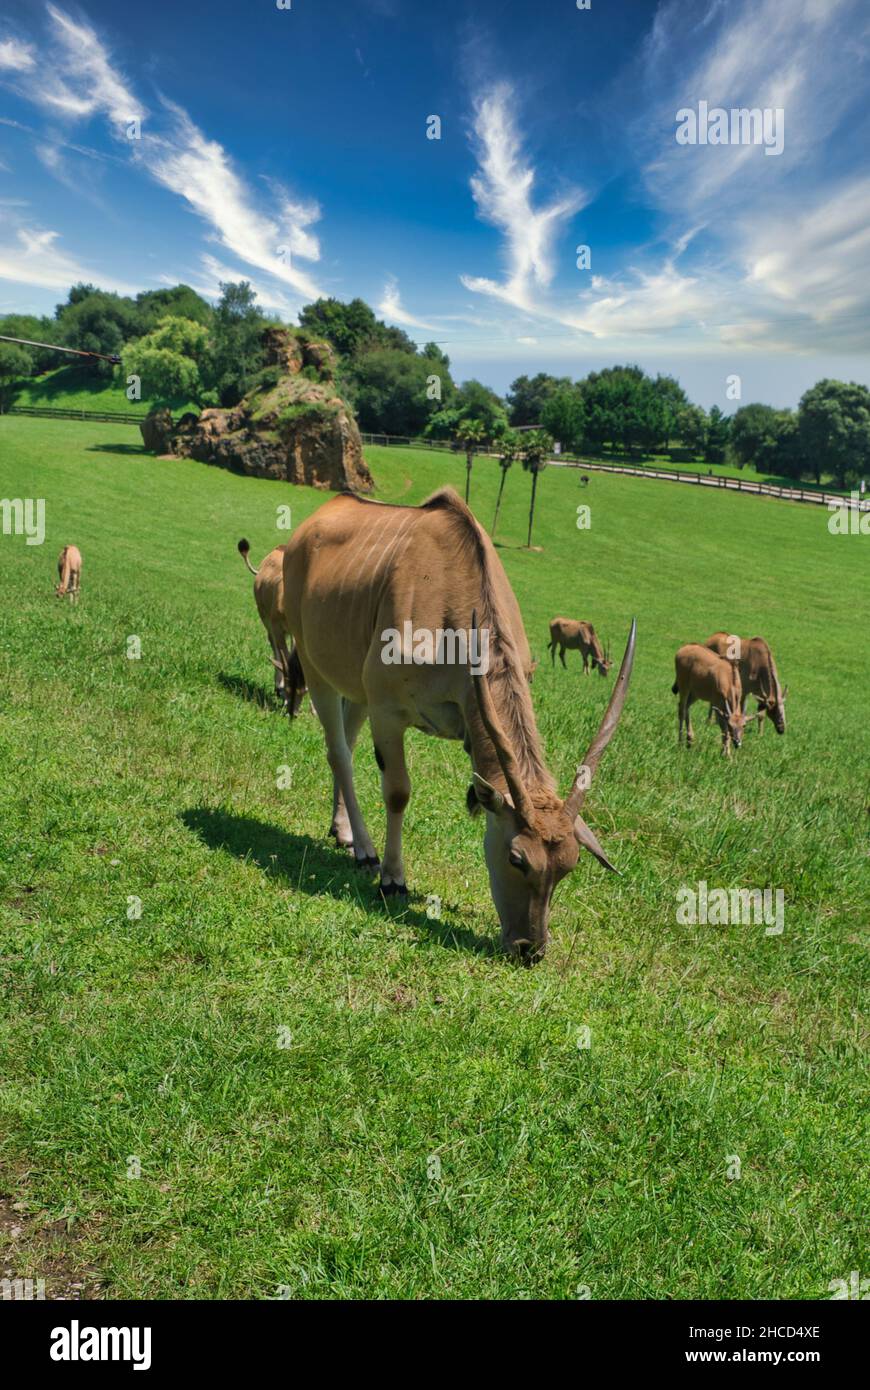 Herd of Common Elands grazing on a field in Cabarceno, Cantabria, Spain Stock Photo